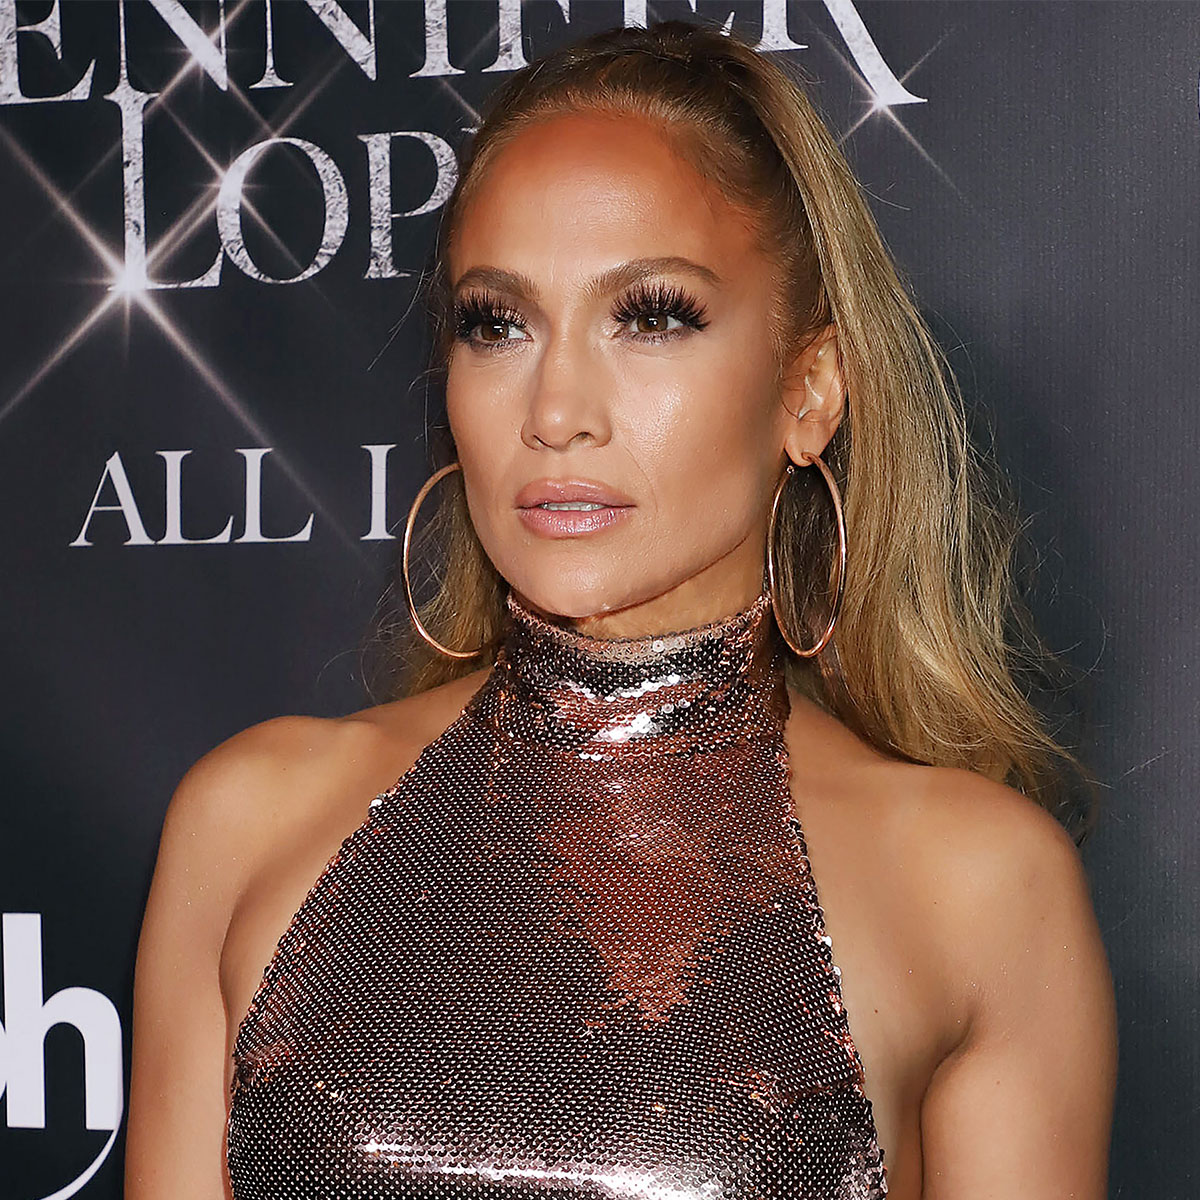 Jennifer Lopez Upskirt American Idol - Jennifer Lopez Poses In A White Corset Top And Low-Rise Leather Skirt For  Her New Albumâ€”Fans Are In Shambles! - SHEfinds